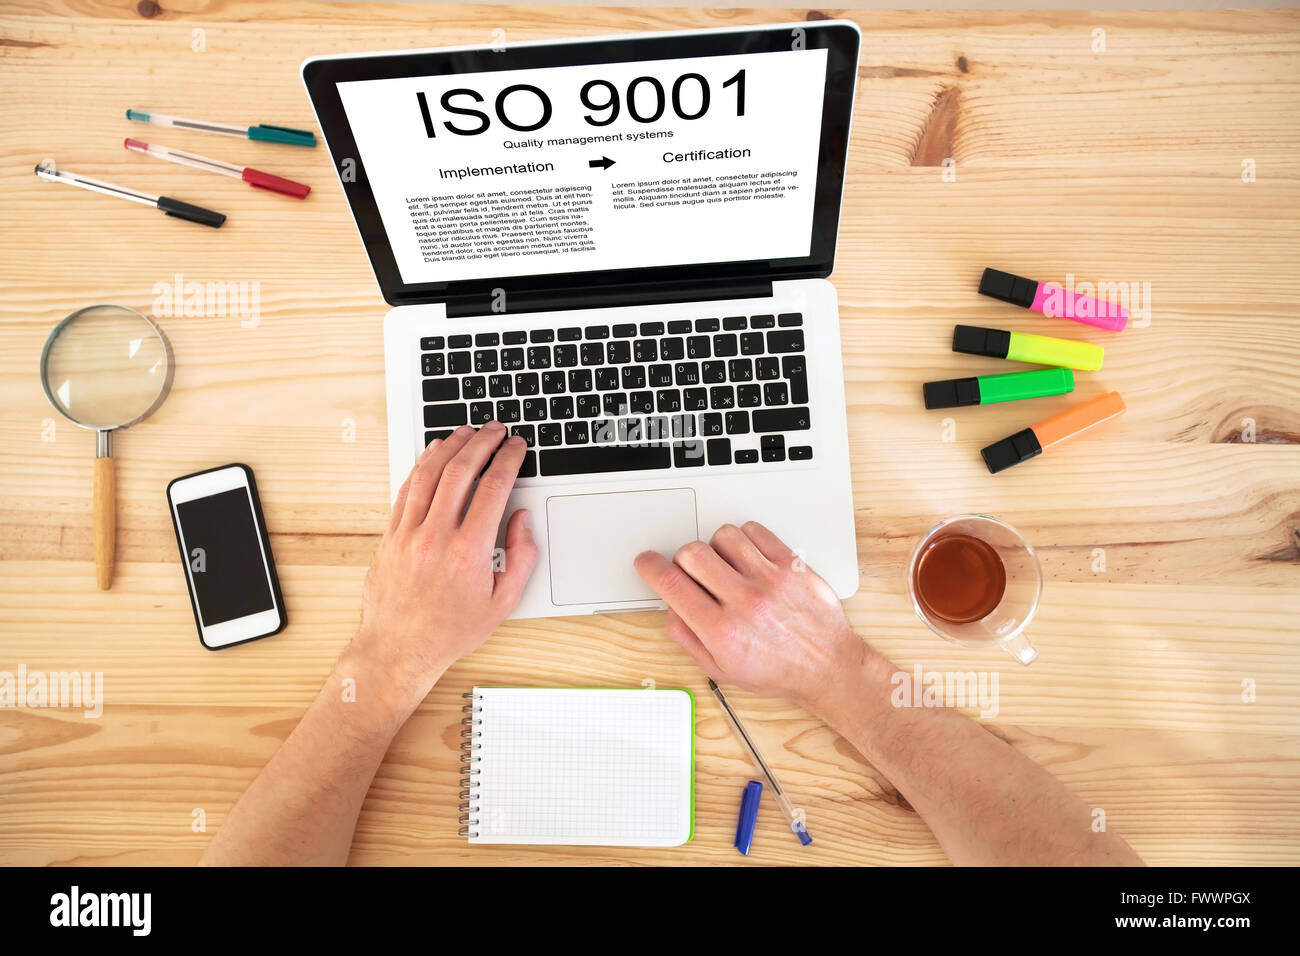 ISO 9001 standard concept, quality management systems Stock Photo